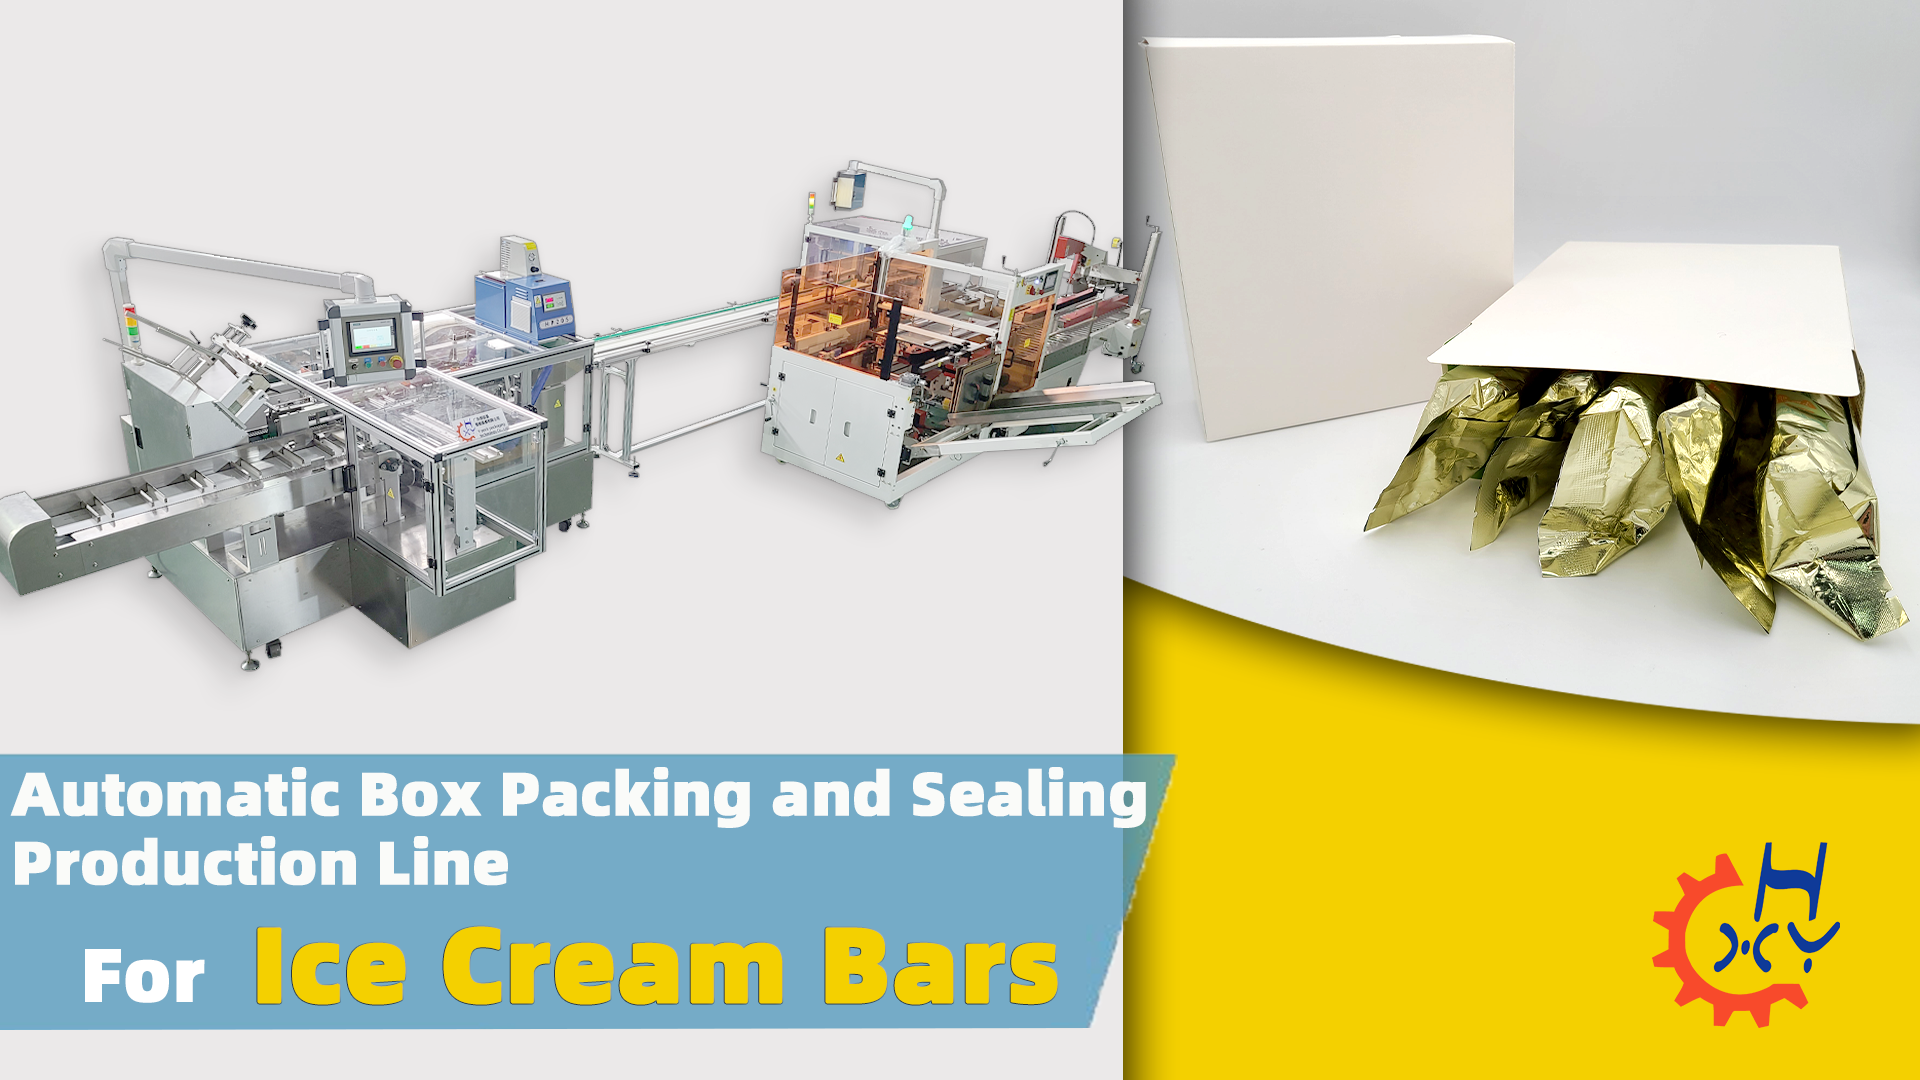 Automatic Box Packing and Sealing Production Line For Ice Cream Bars